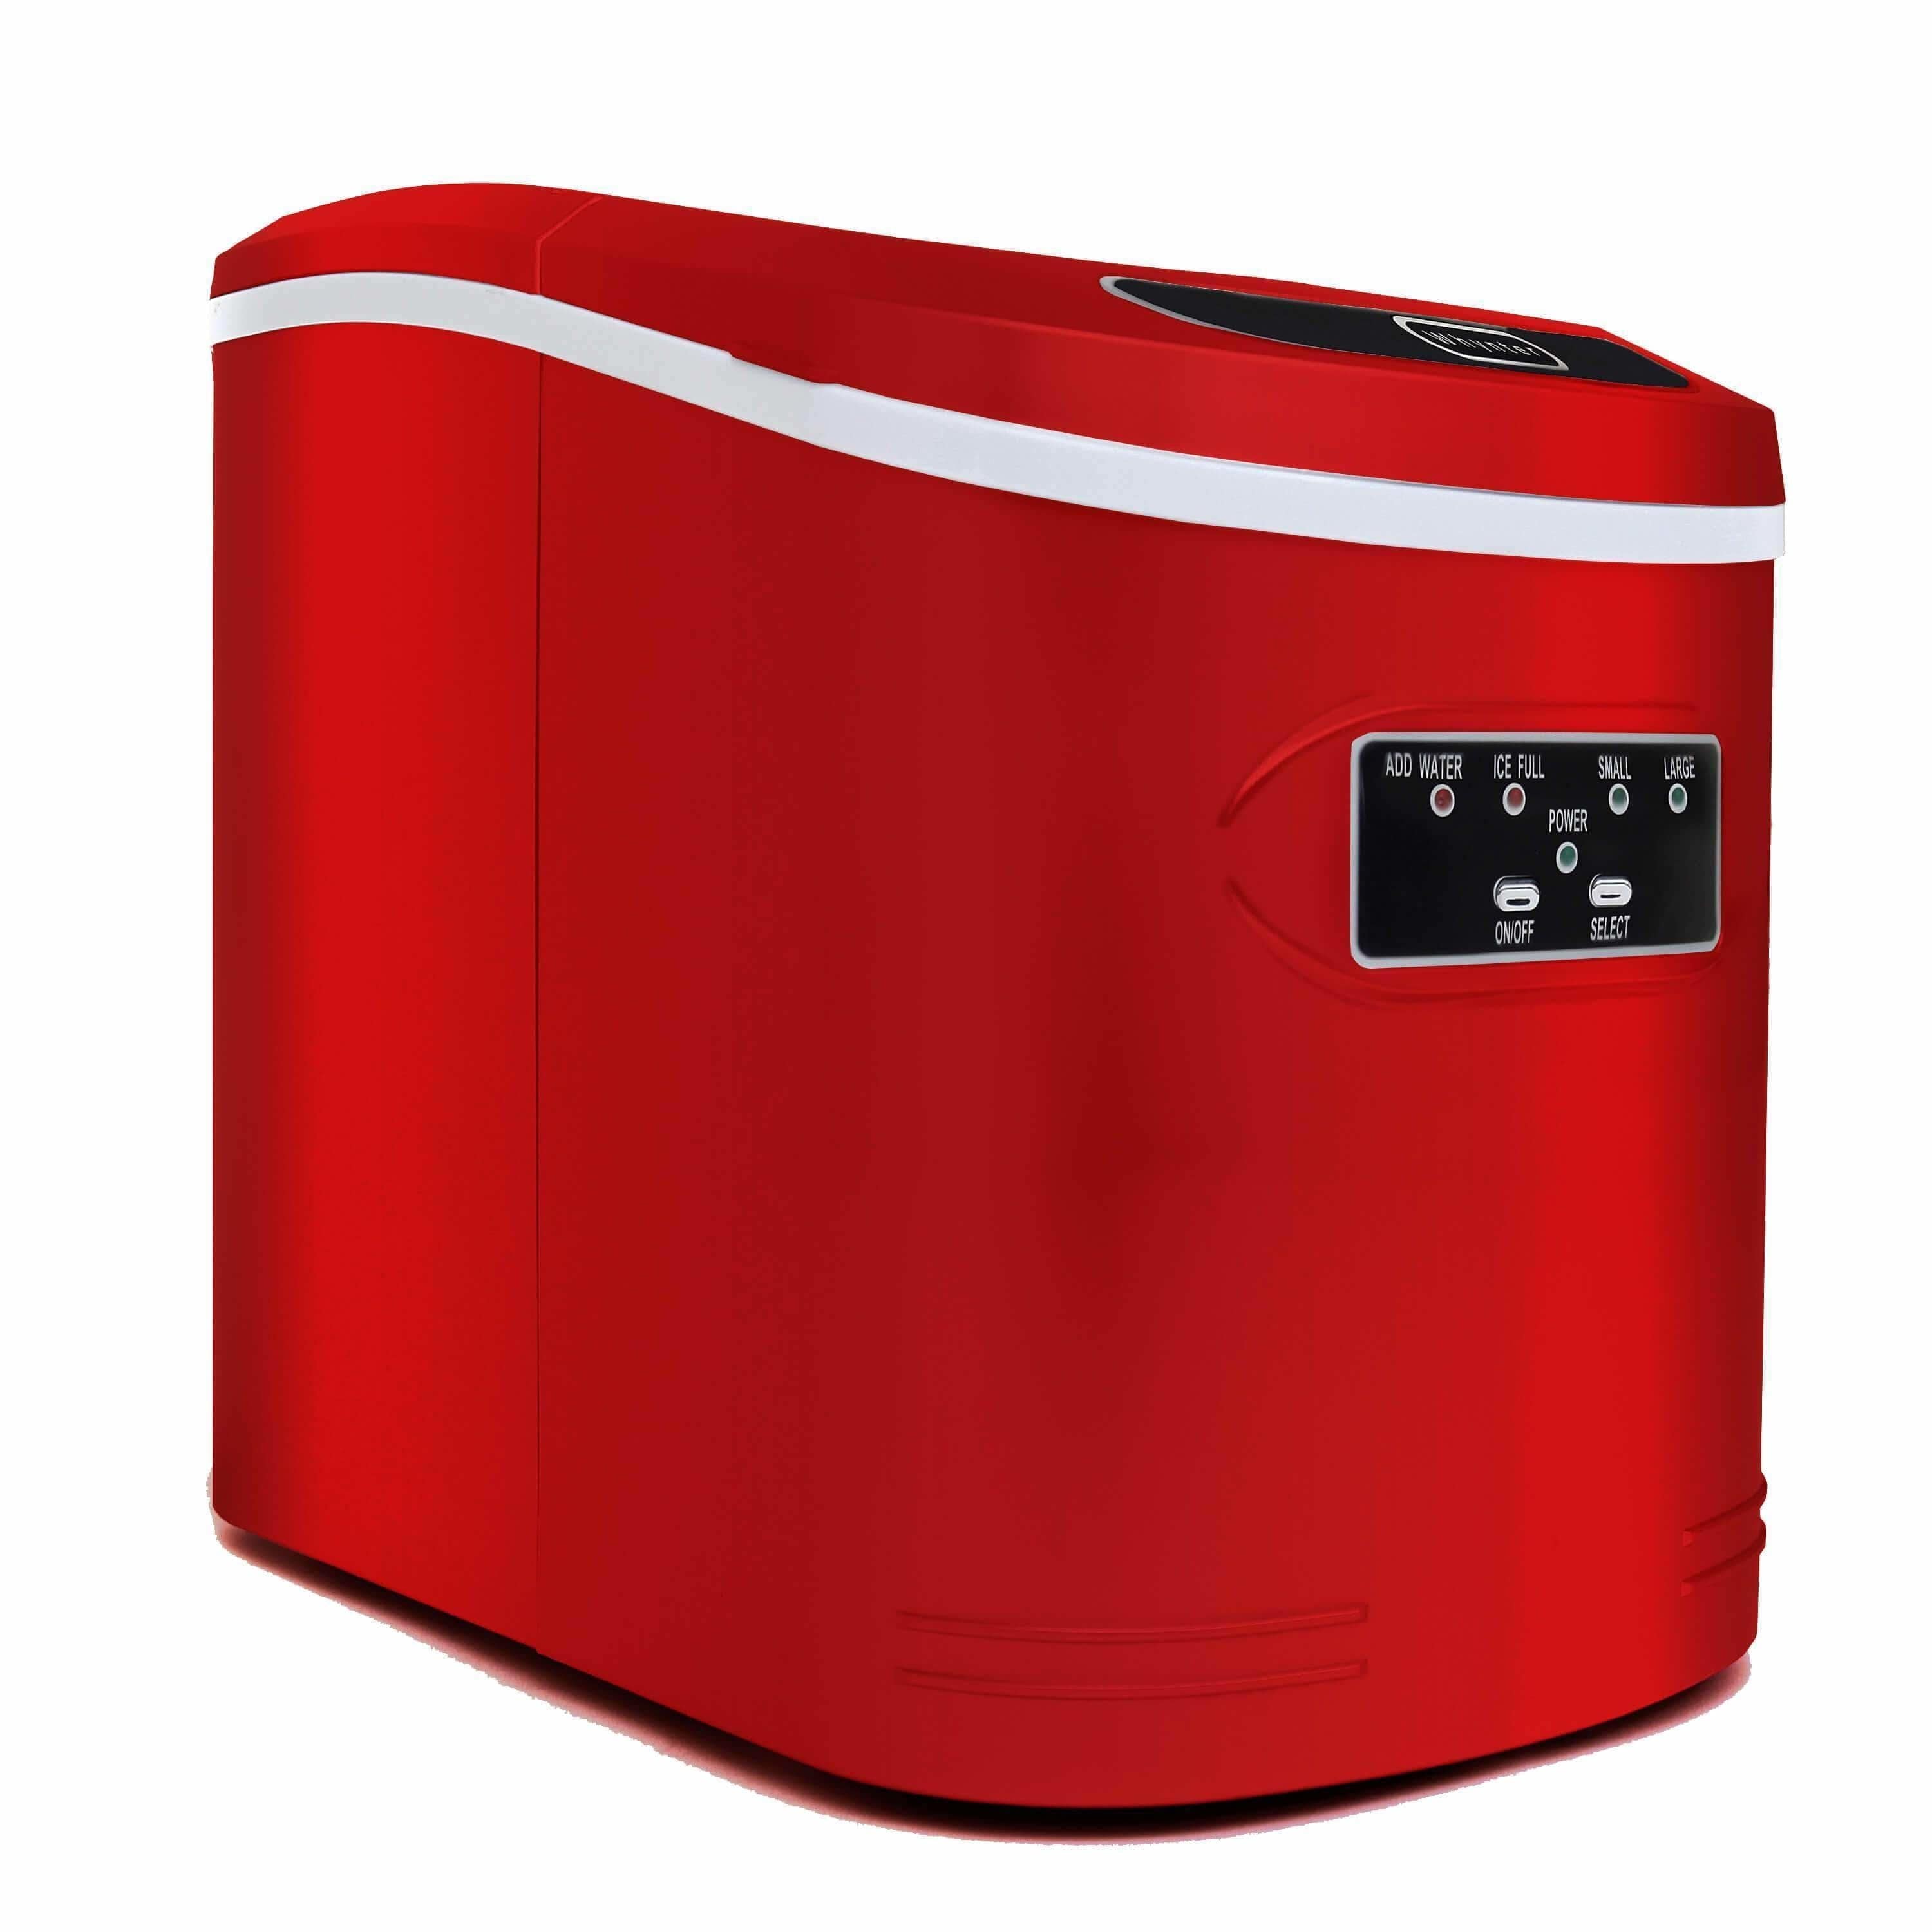 Whynter Compact Portable Ice Maker 27 lb capacity Red IMC-270MR Portable/Counter Top Ice Makers IMC-270MR Luxury Appliances Direct